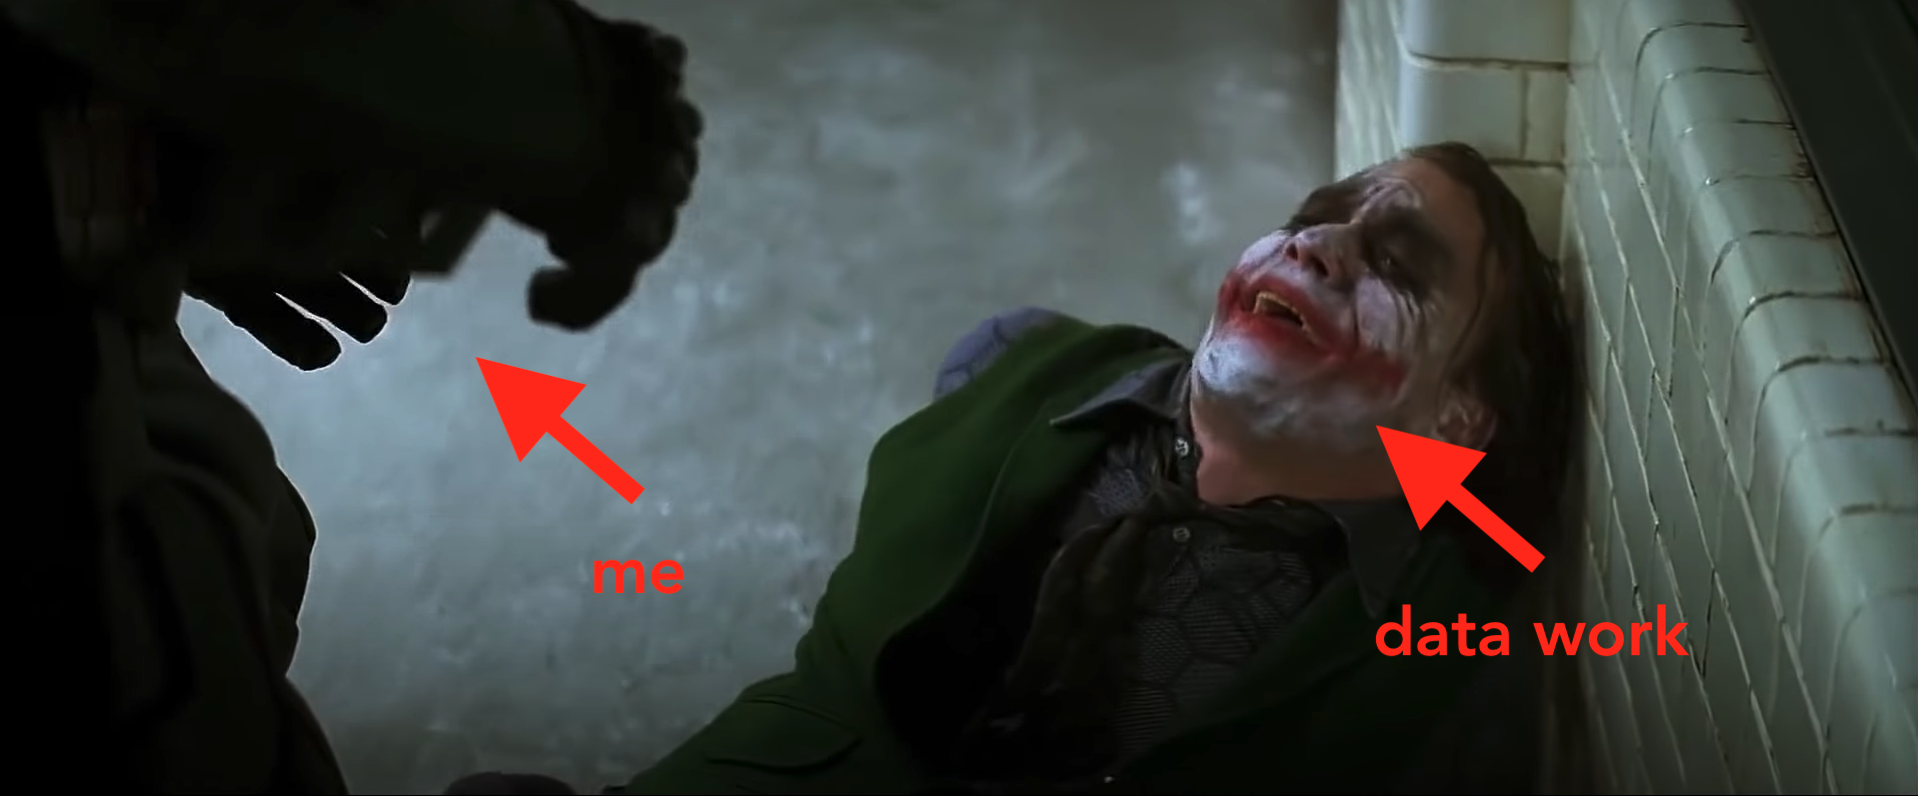 the joker laughing after batman hits him. an arrow labelled &ldquo;me&rdquo; is pointing at batman and another labelled &ldquo;data work&rdquo; is pointed at the joker 